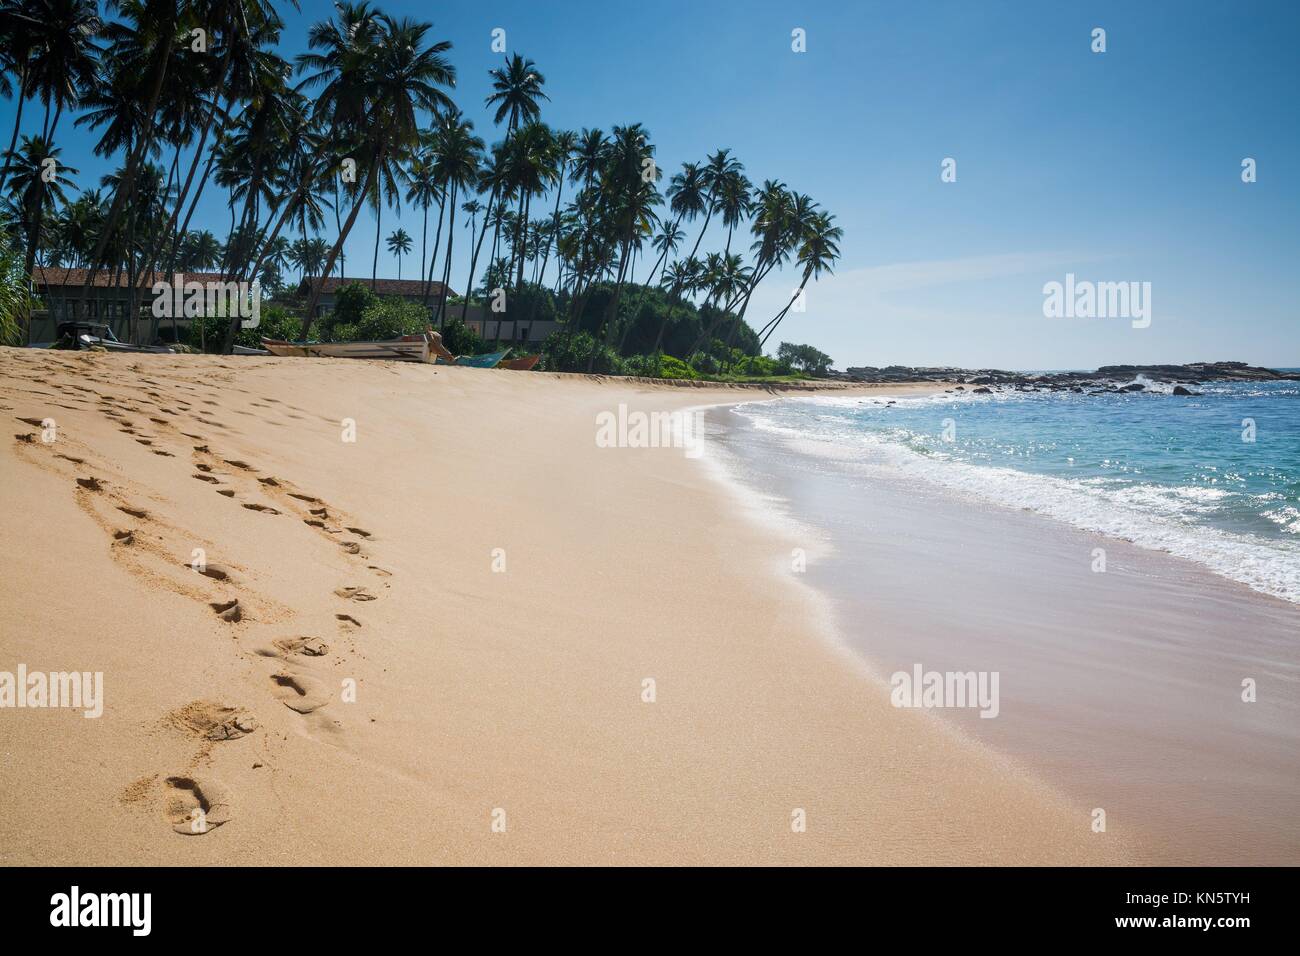 Paradise beach with coconut trees and footprints in golden sand, Tangalle, Southern Province, Sri Lanka, Asia. Stock Photo